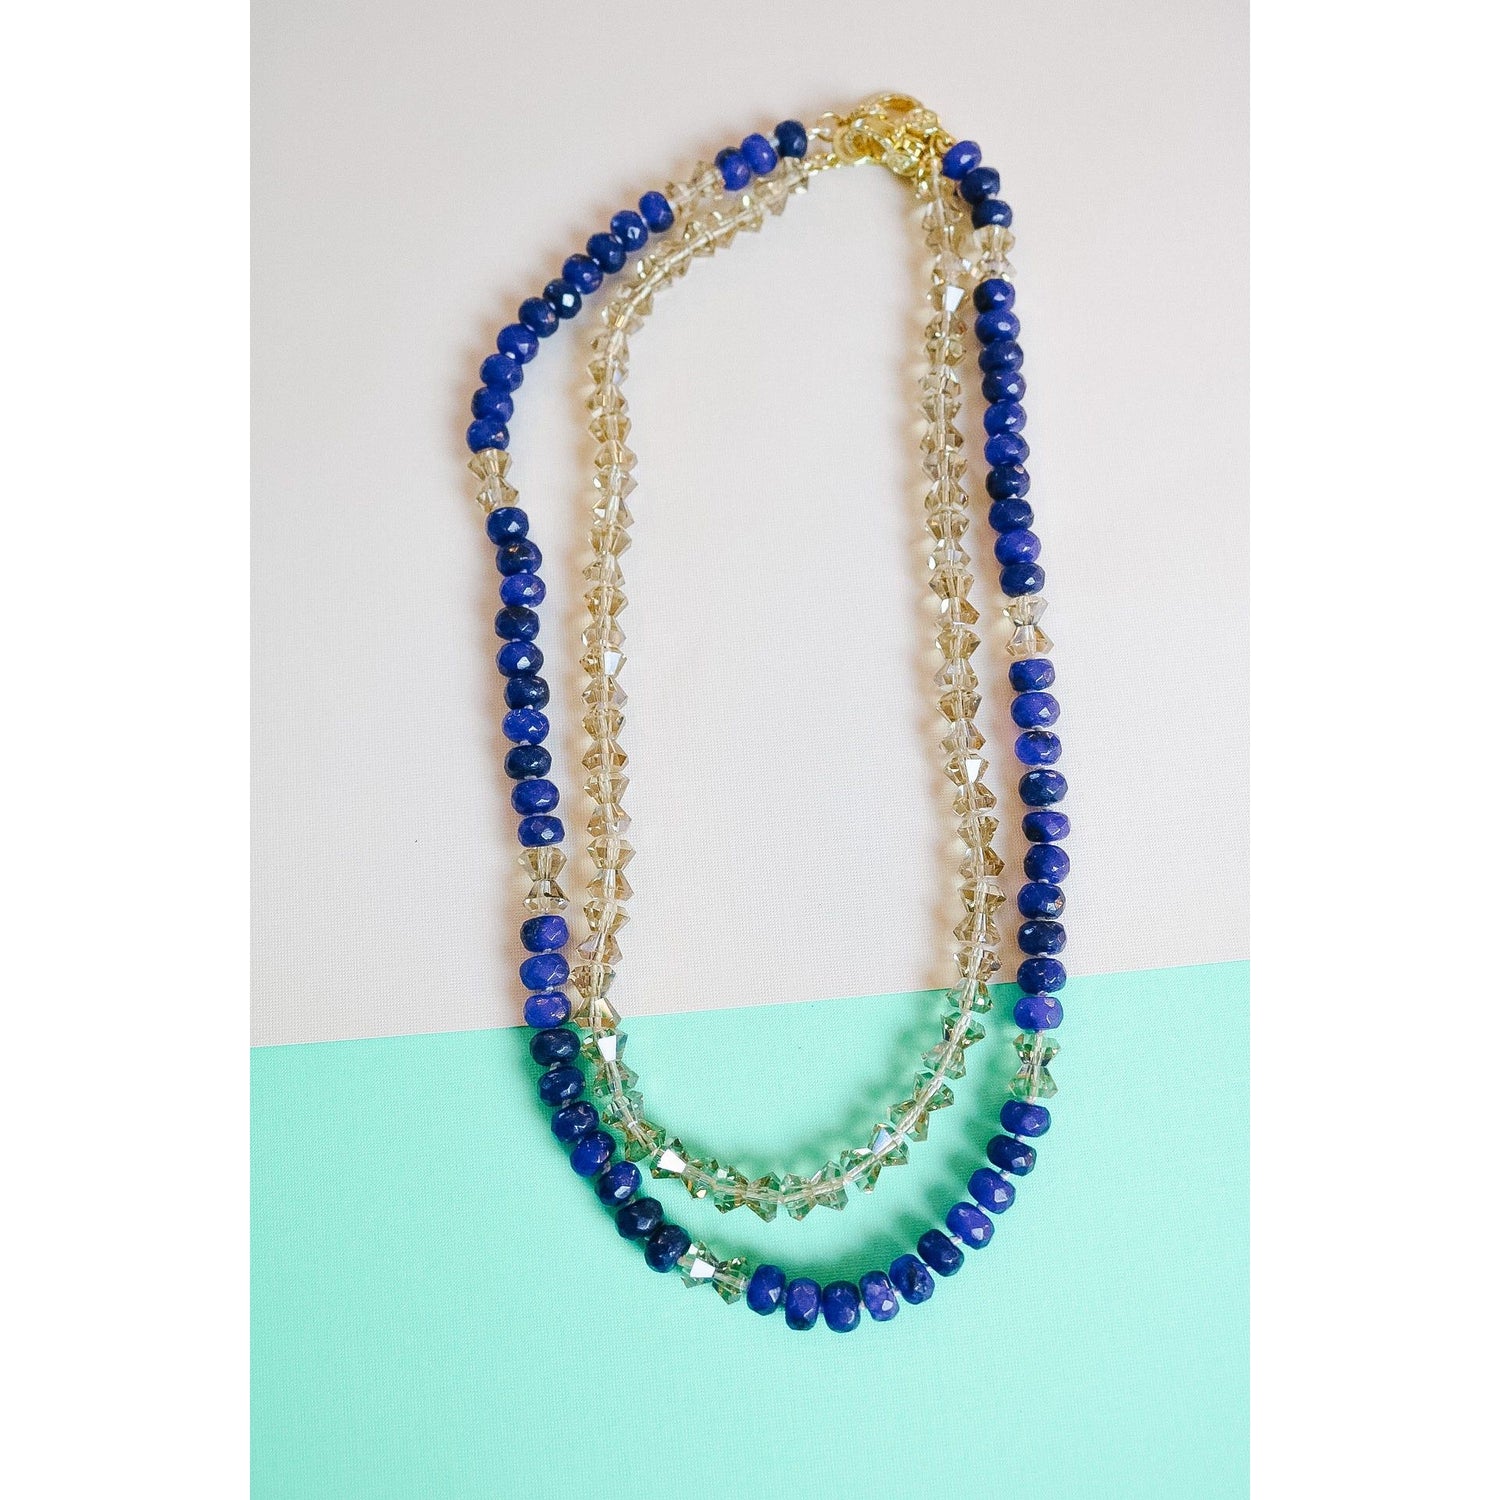 The crystal bow necklace shown, styled with the lapis bow necklace